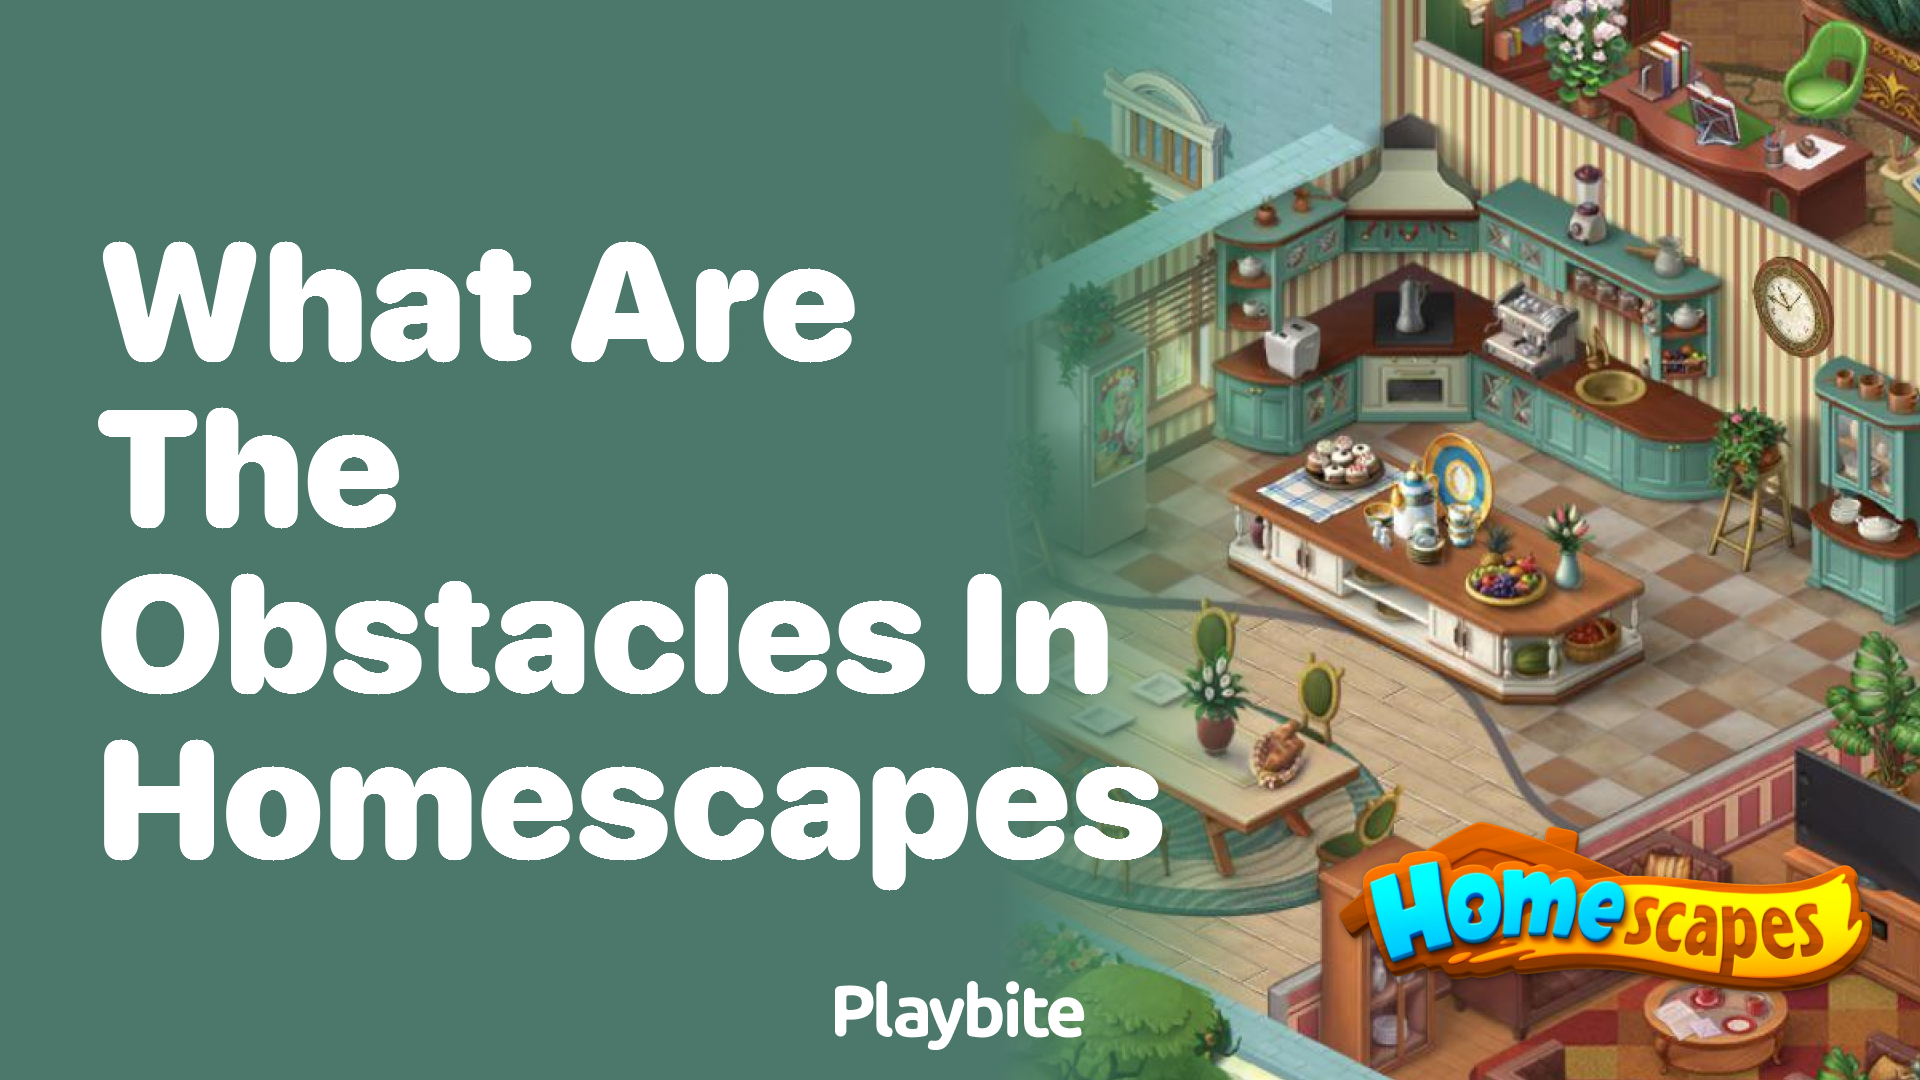 What are the obstacles in Homescapes?